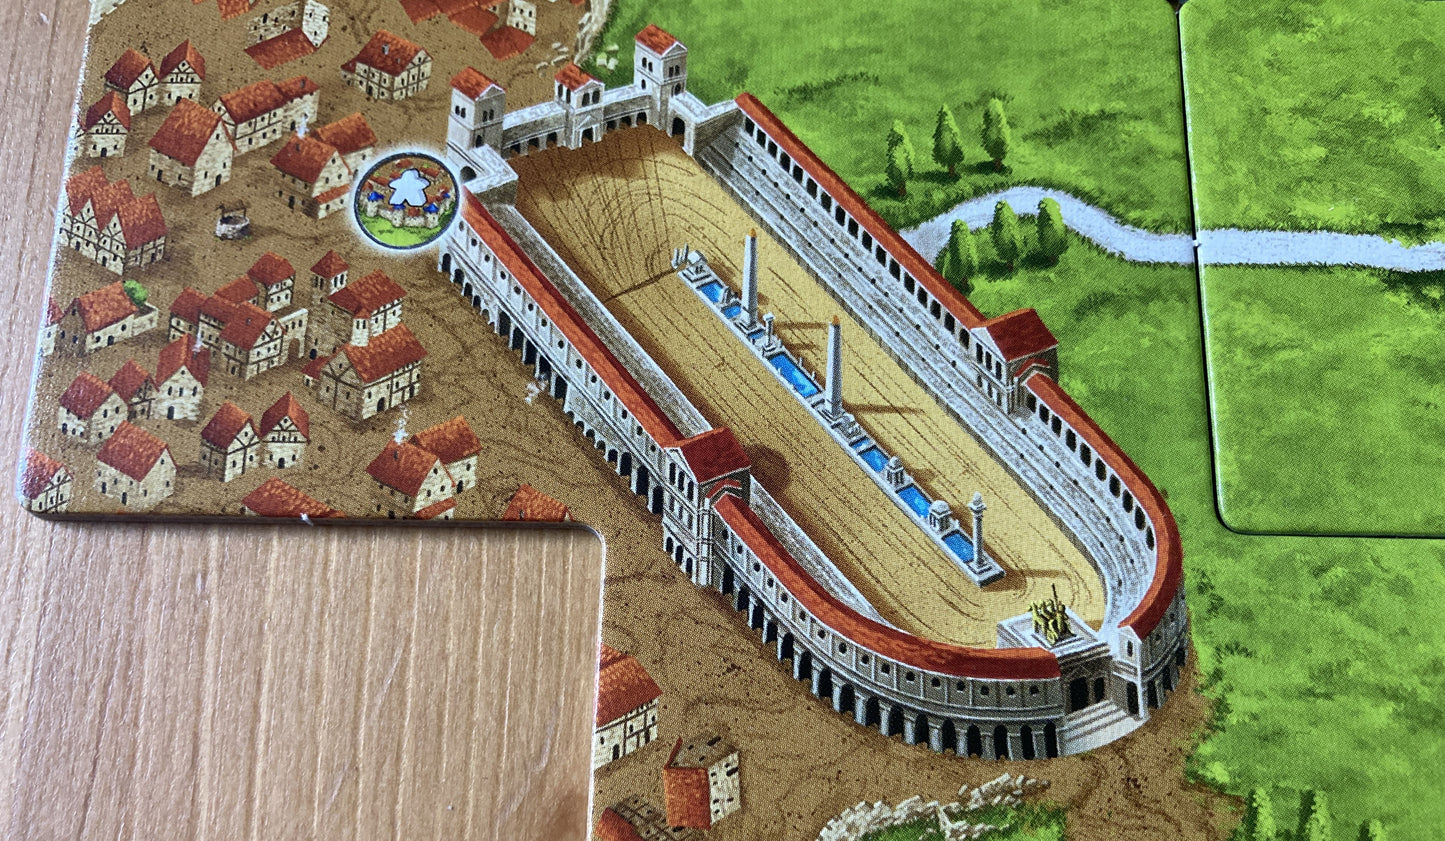 Close-up view of the Circus Maximus on one of the tiles with this Wonders of Humanity mini expansion for Carcassonne.